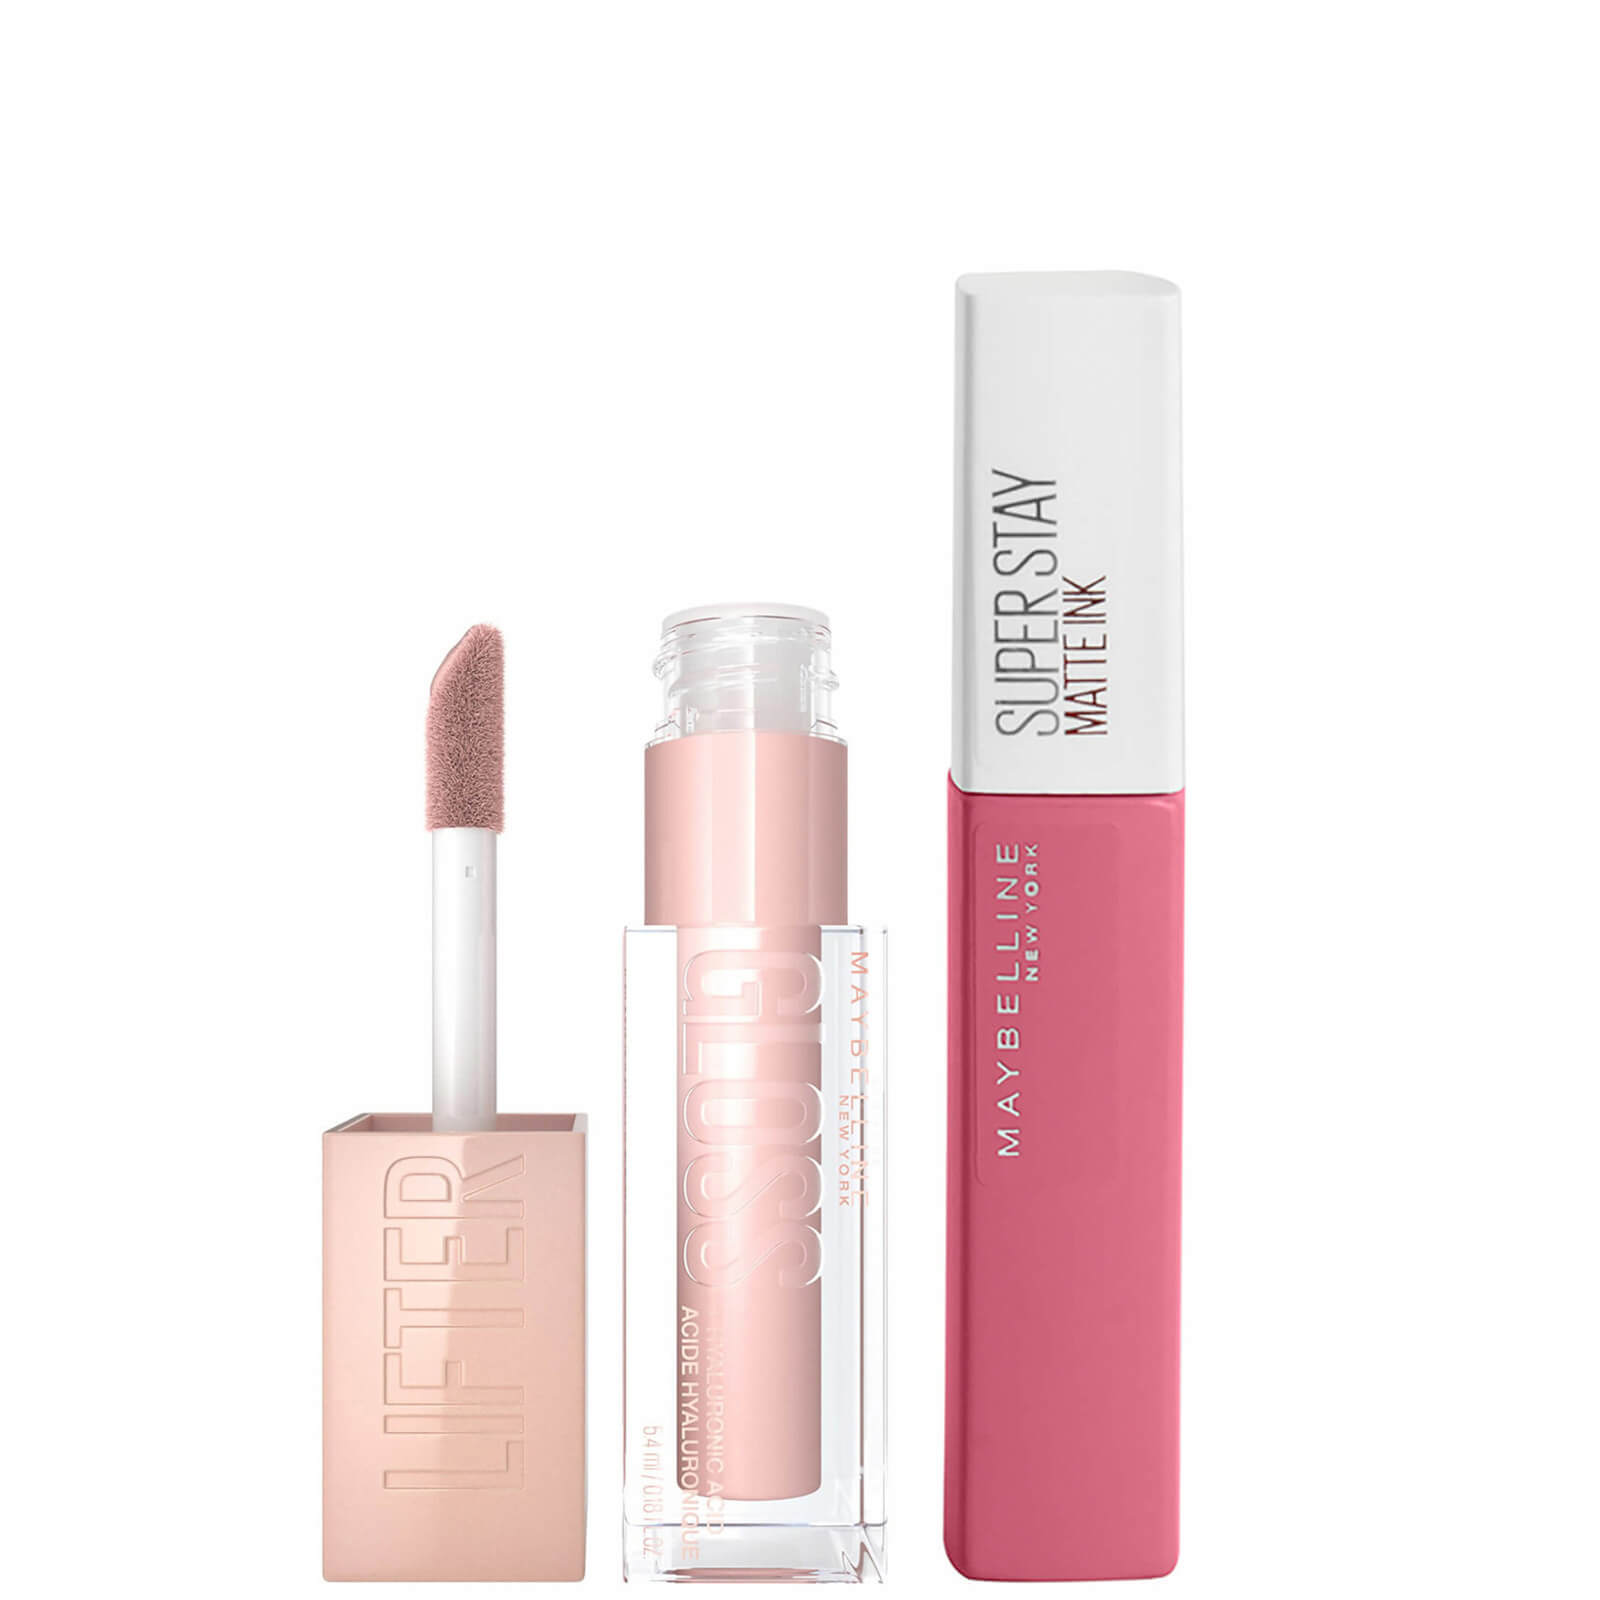 Maybelline Lifter Gloss and Superstay Matte Ink Lipstick Bundle (Various Shades) - 125 Inspirer